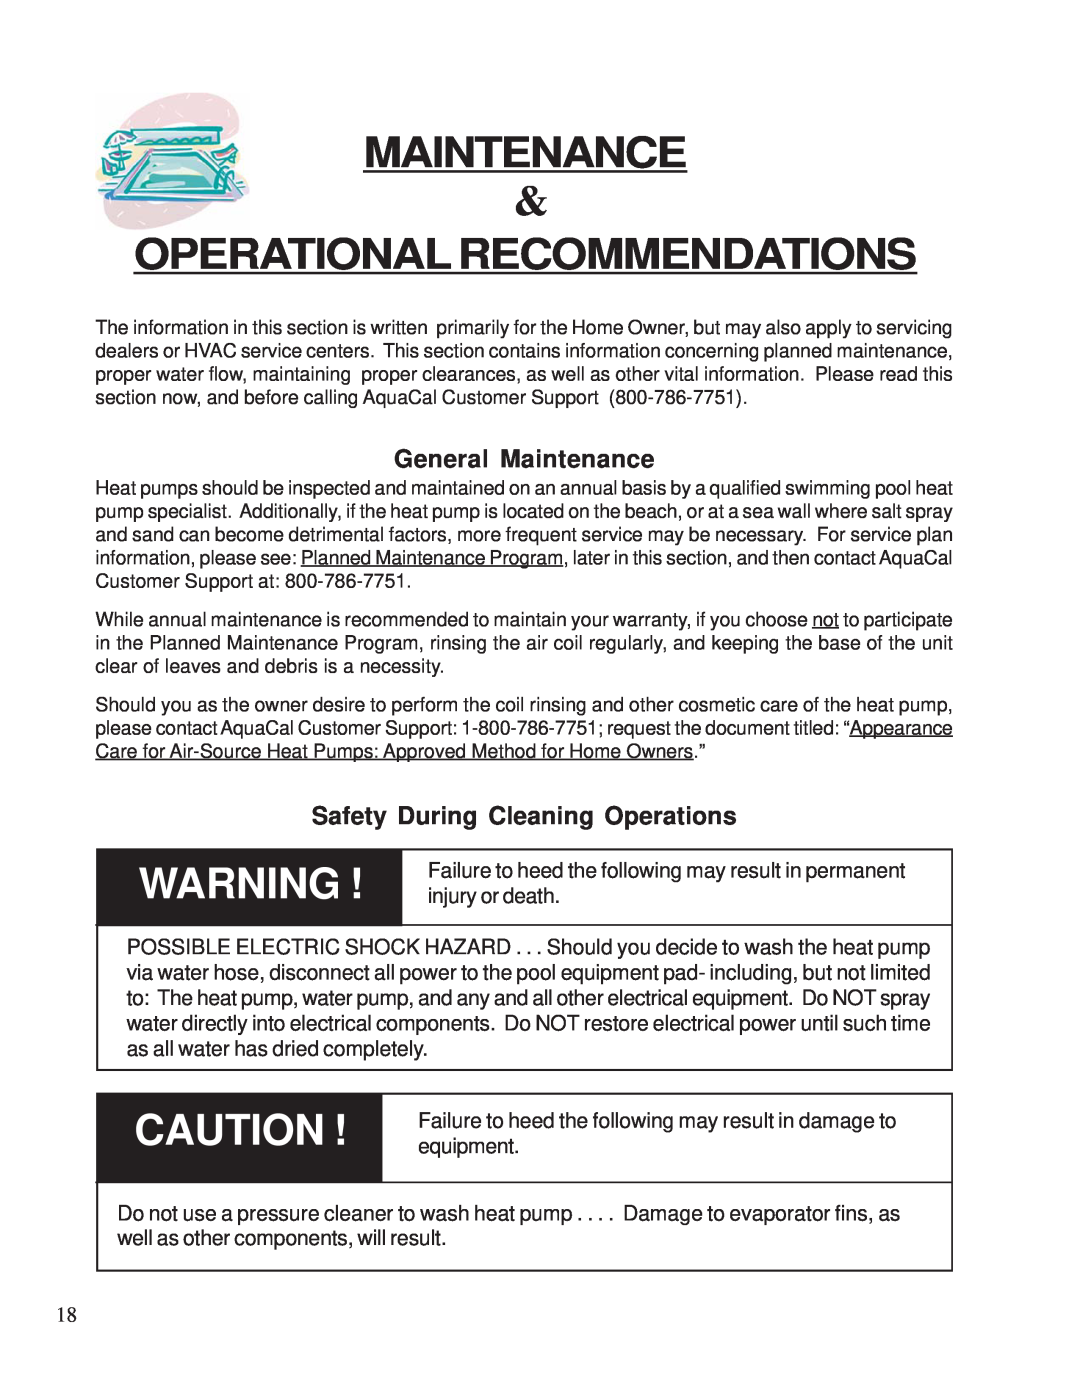 Aquacal 100 owner manual Operational Recommendations, General Maintenance, Safety During Cleaning Operations 